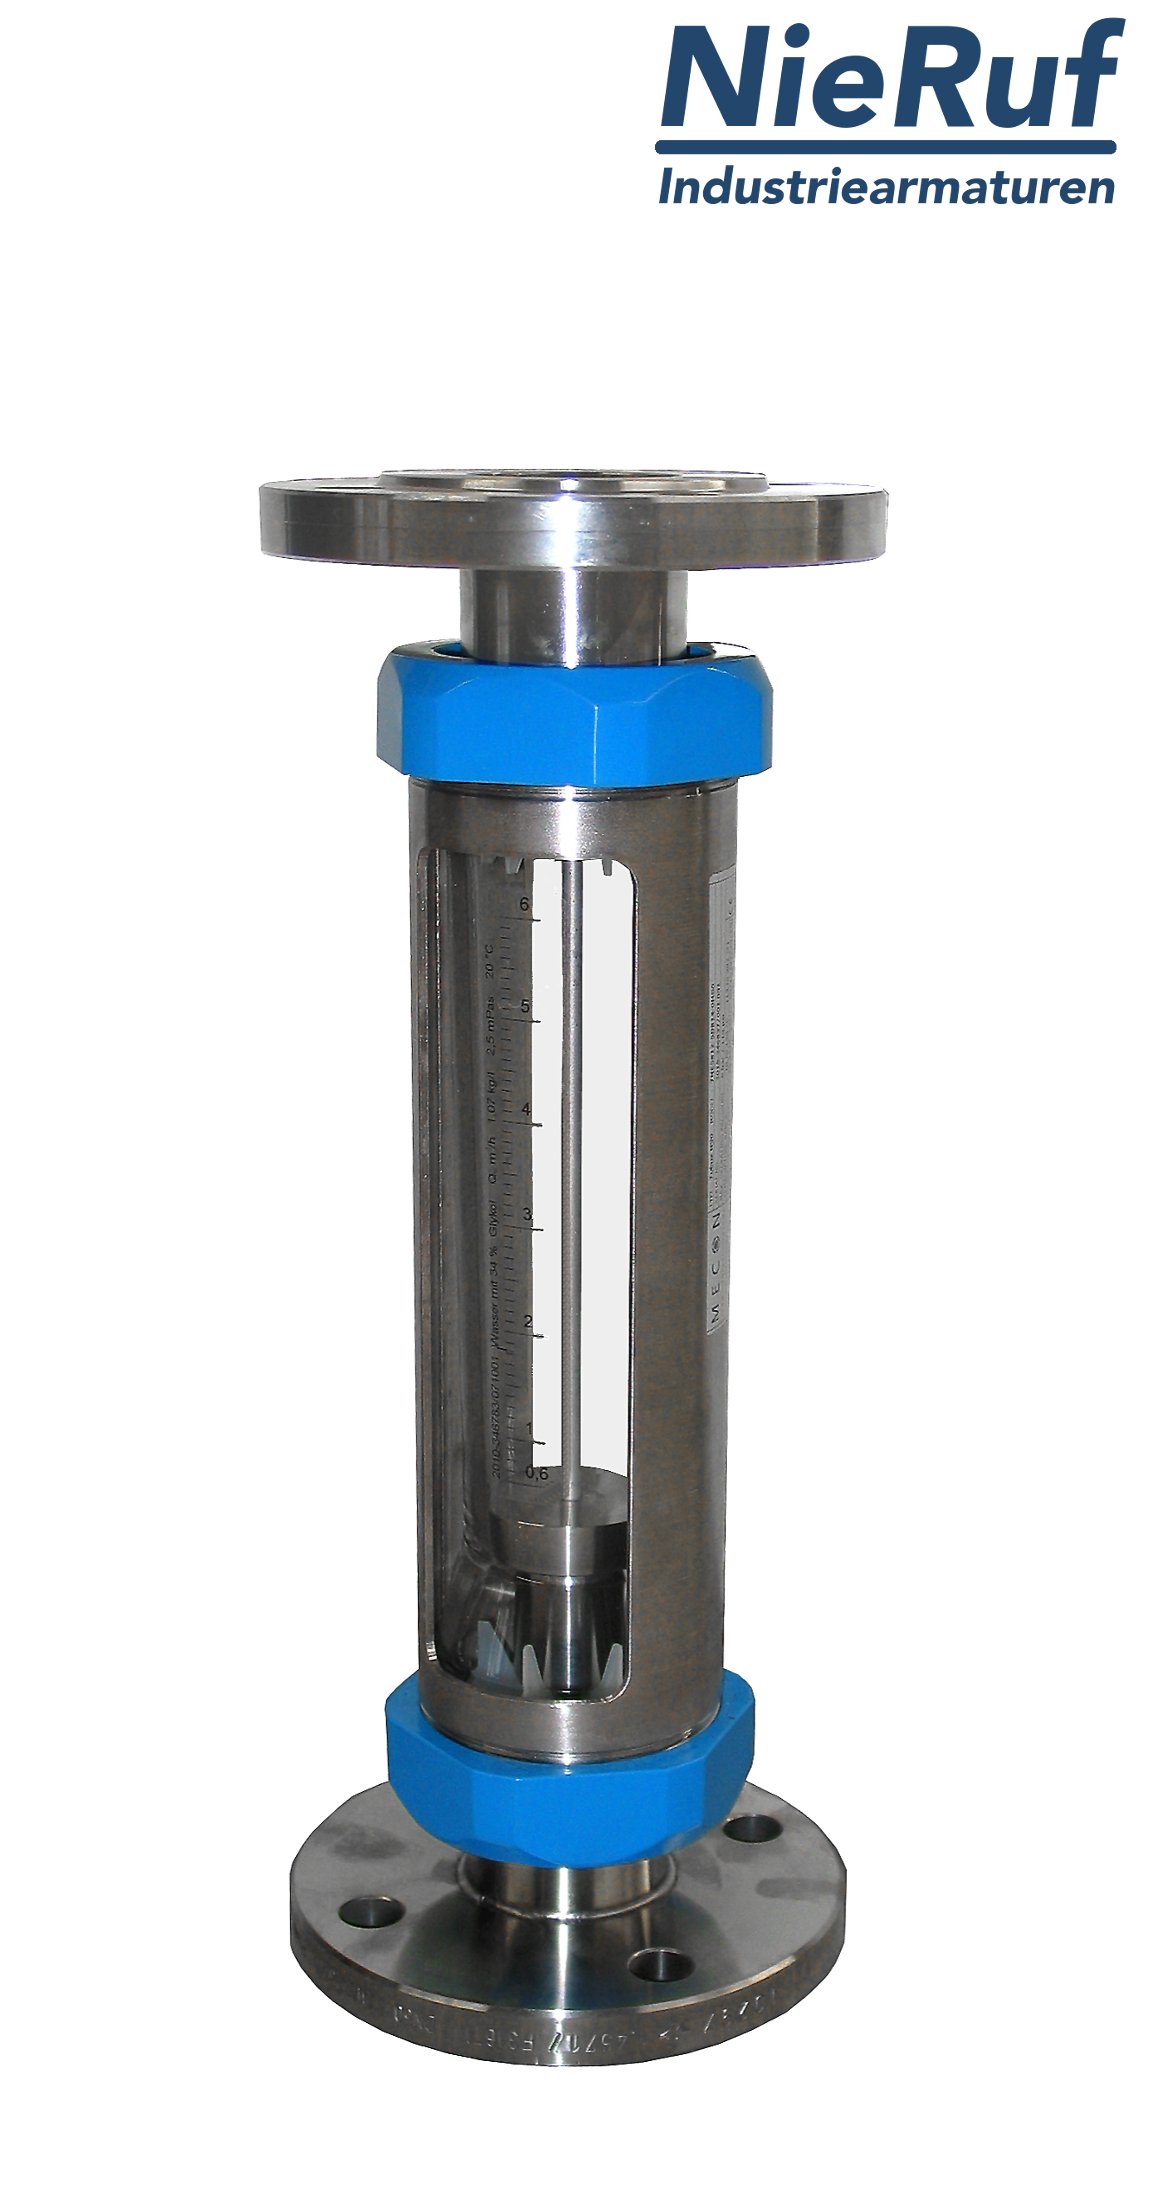 Variable area flowmeter stainless steel + borosilicate flange DN15 20.0 - 200.0 l/h water FKM